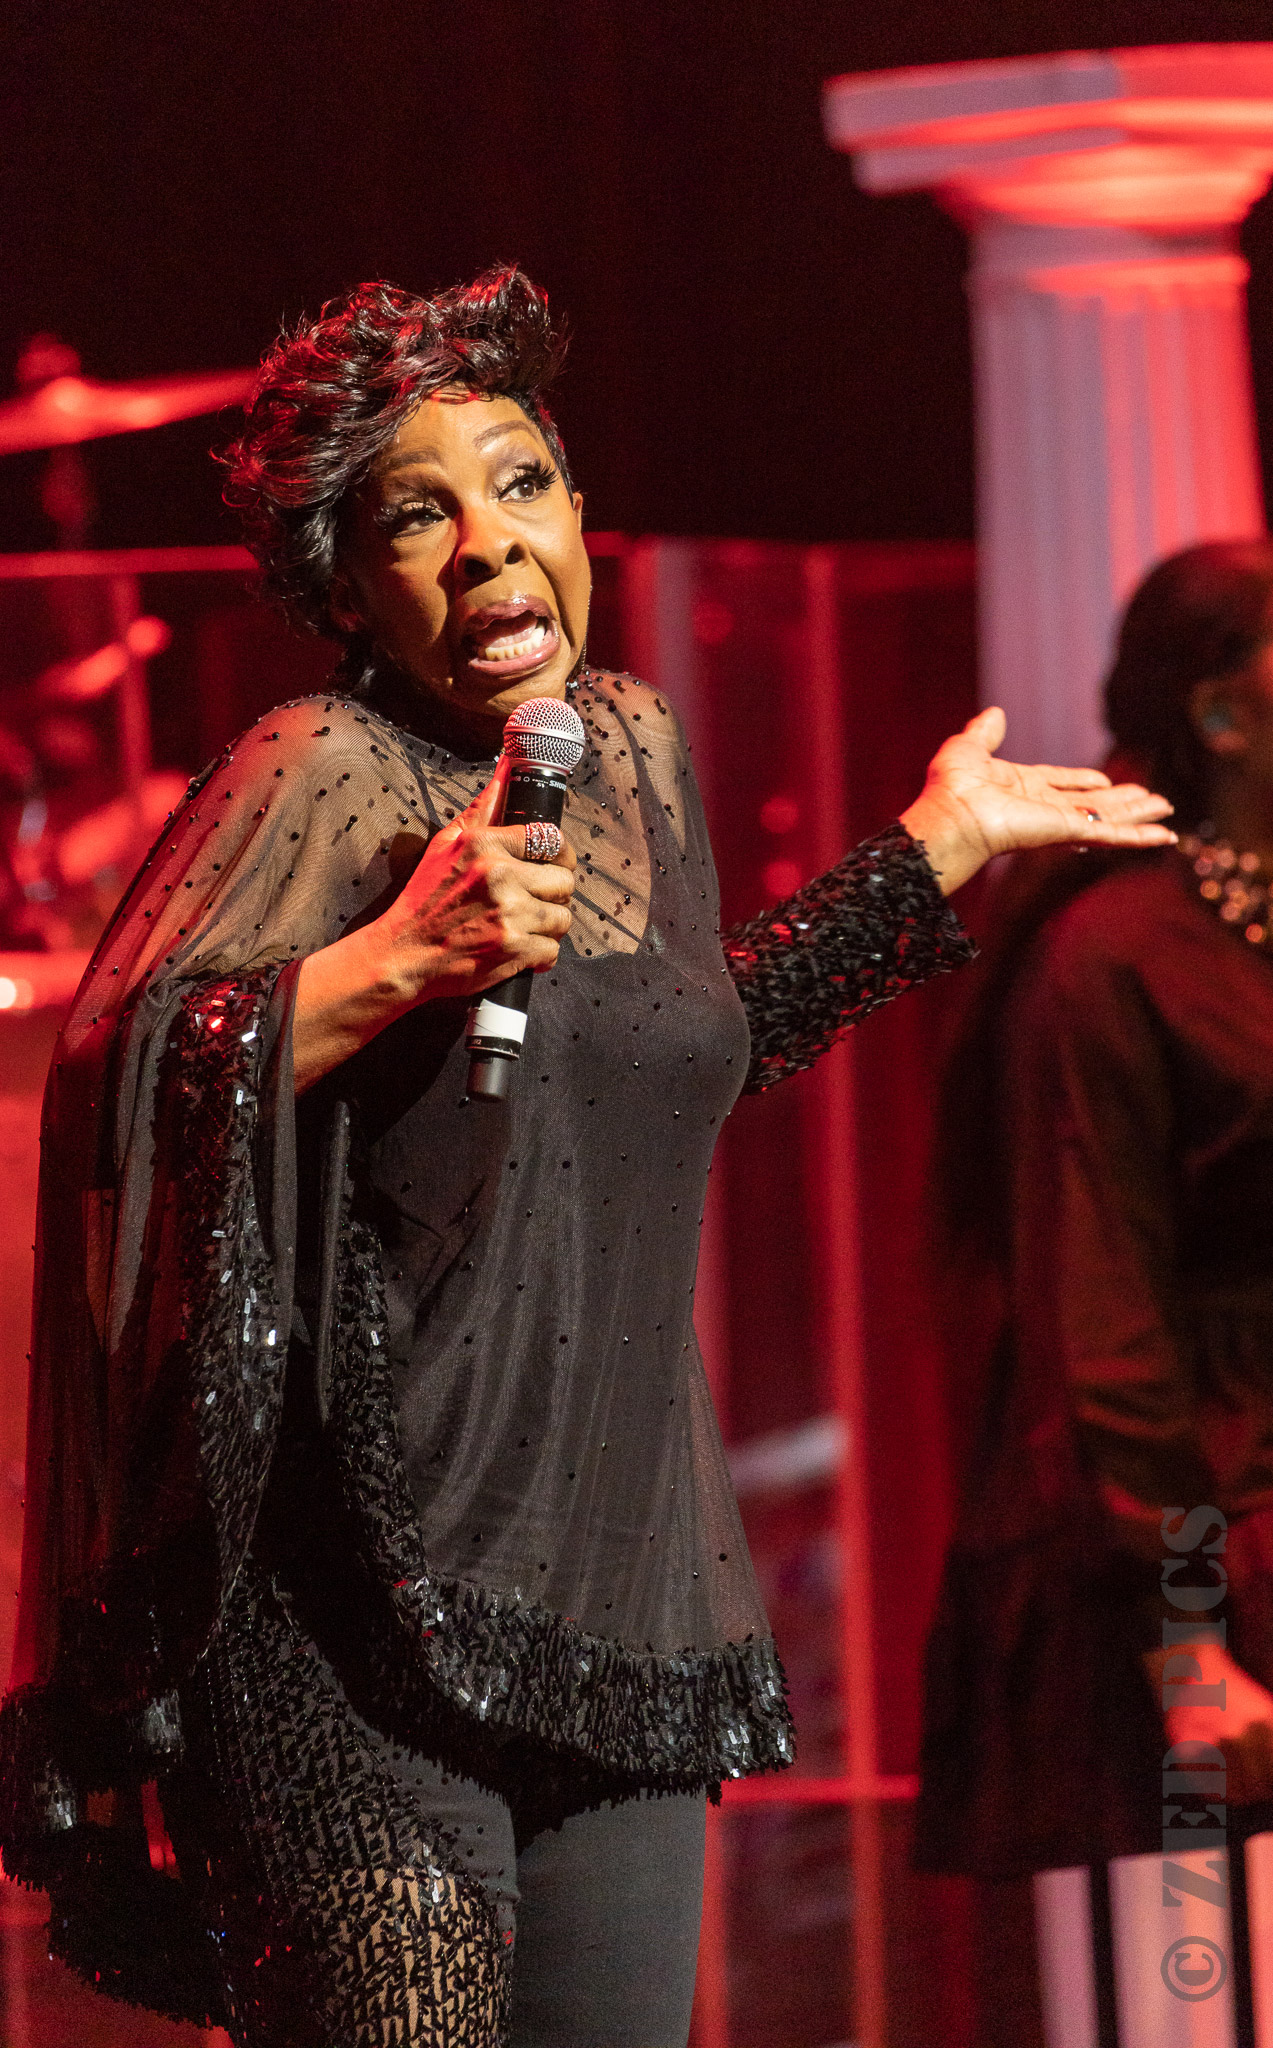 Concert Review Gladys Knight, Auckland New Zealand, 2020